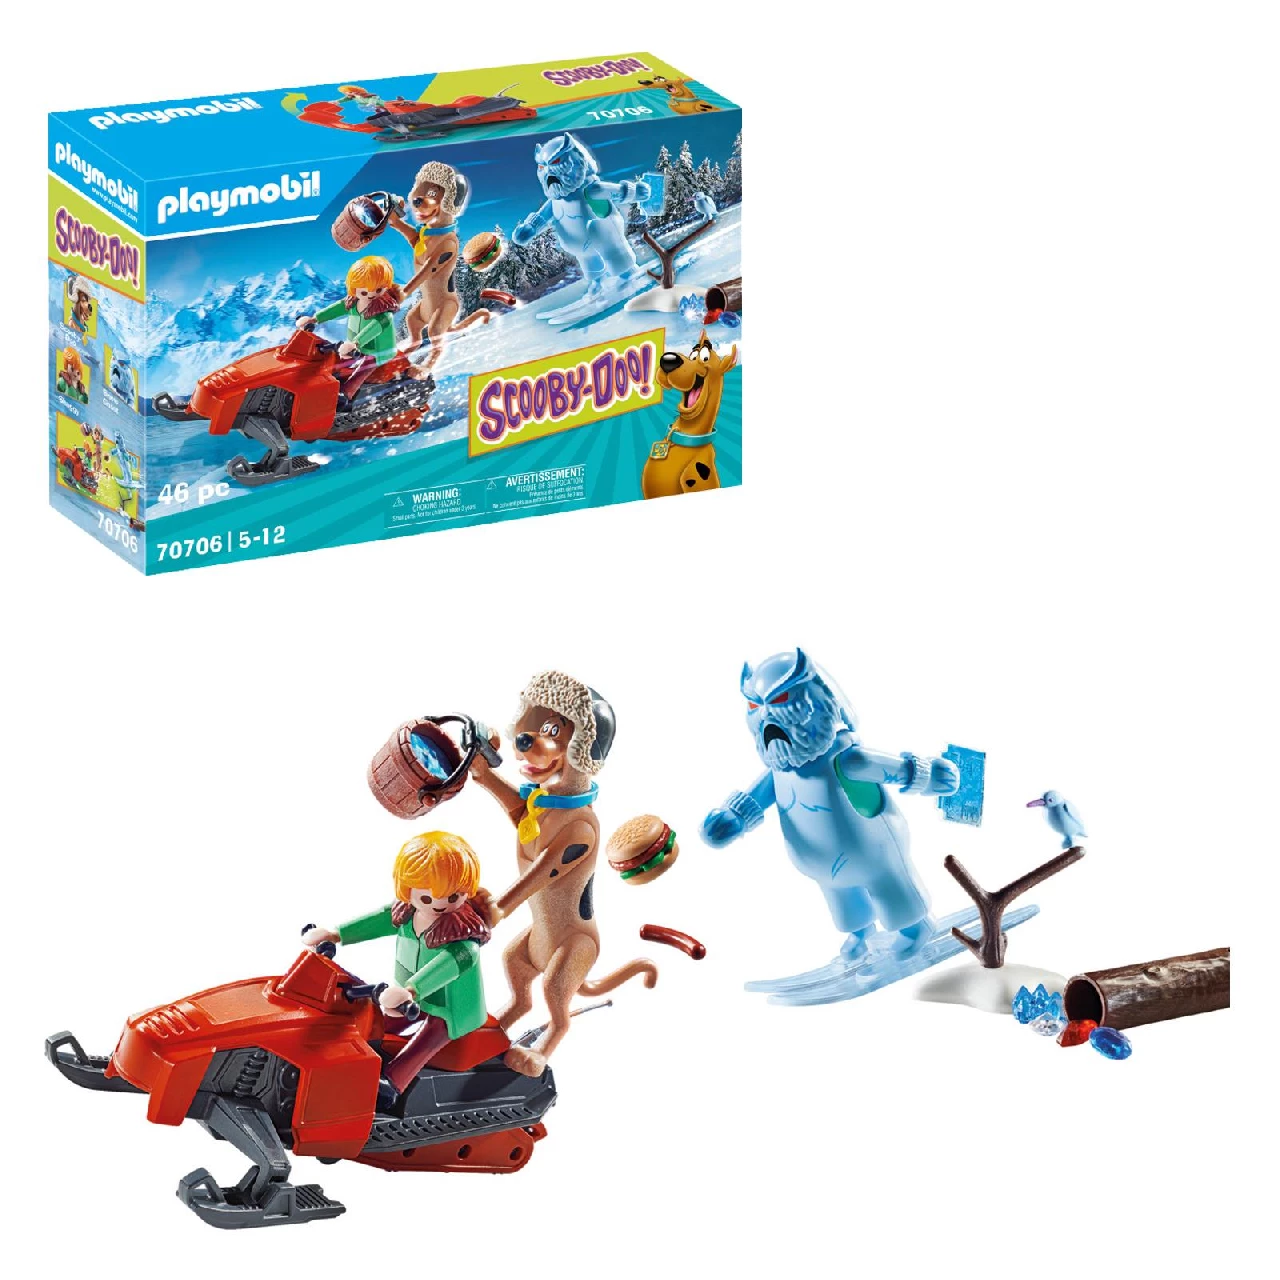 Playmobil Scooby-DOO! Adventure with Snow Ghost